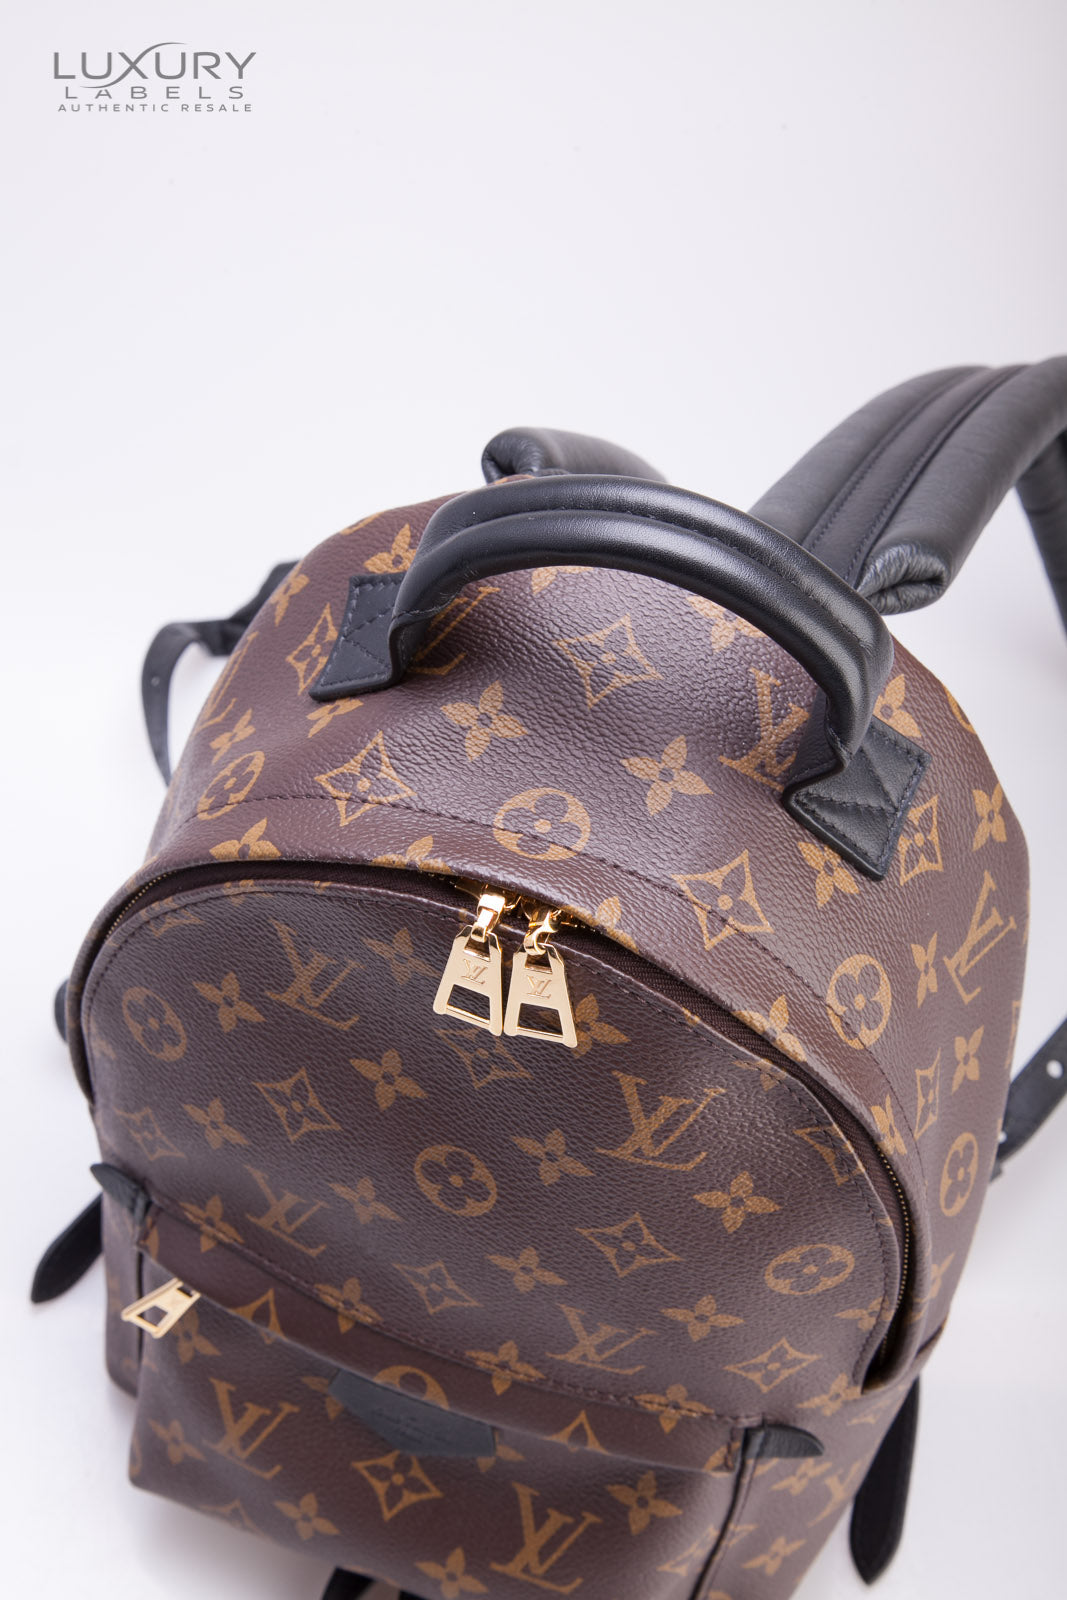 Louis Vuitton Palm spring back pack - AWL2373 – LuxuryPromise